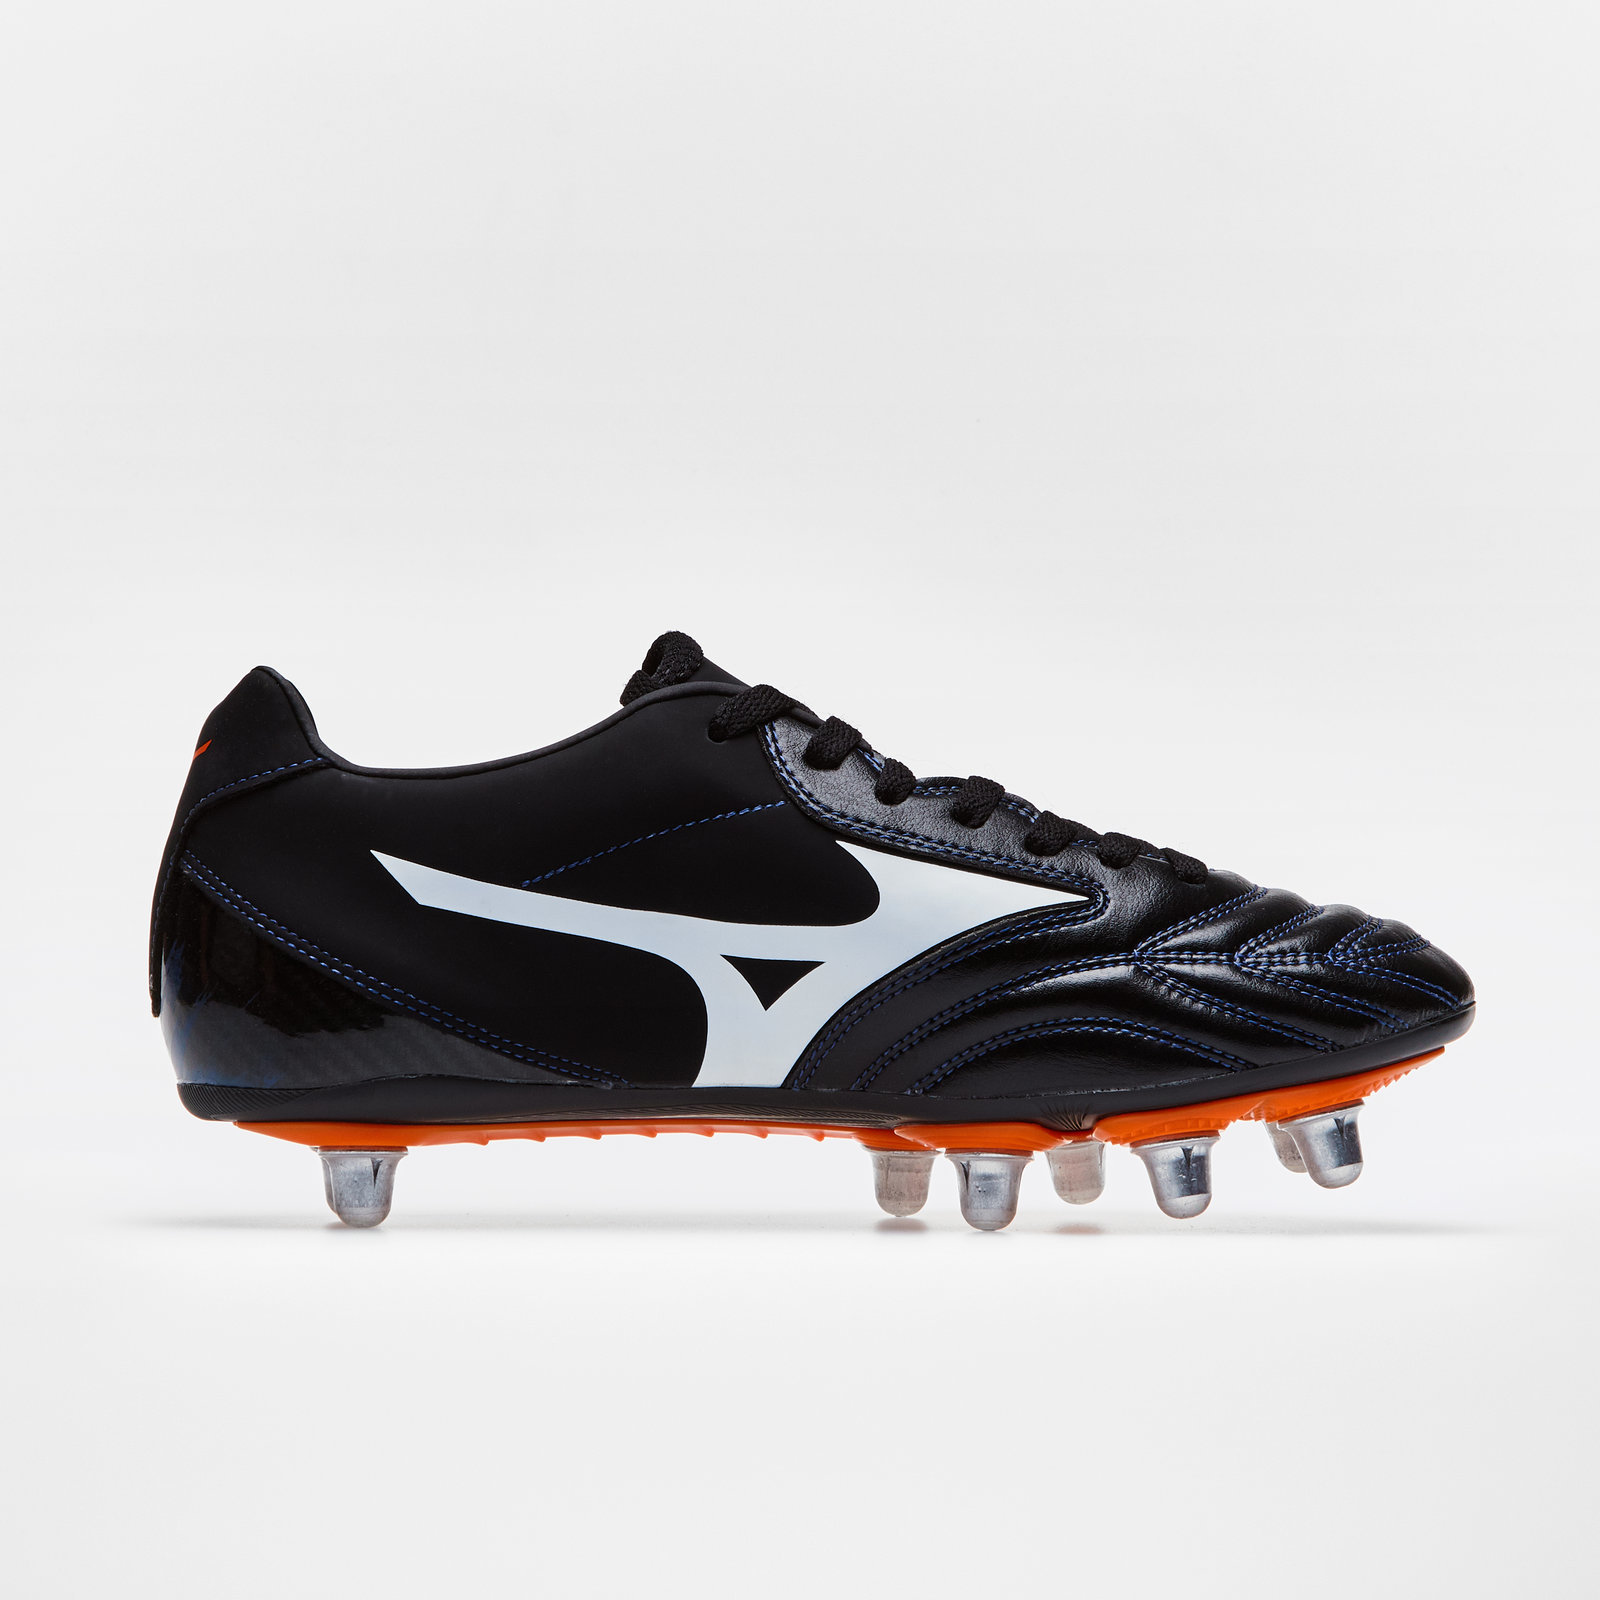 mizuno rugby boots size 13